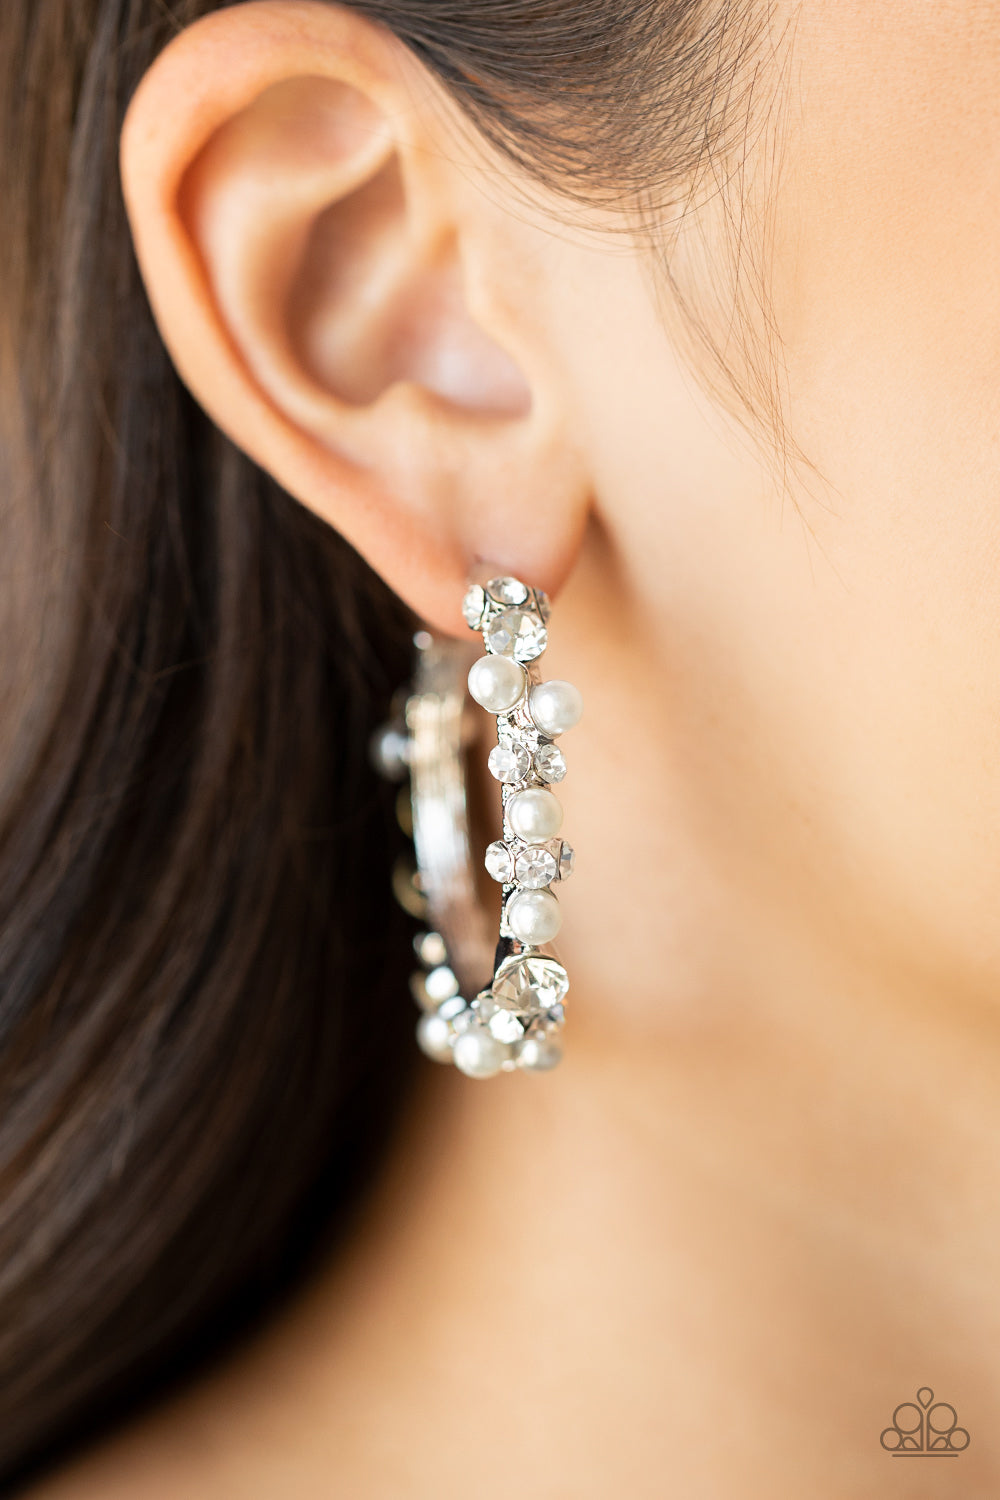 Let There Be SOCIALITE - White rhinestones/Pearl hoop earrings (September Life of the Party)